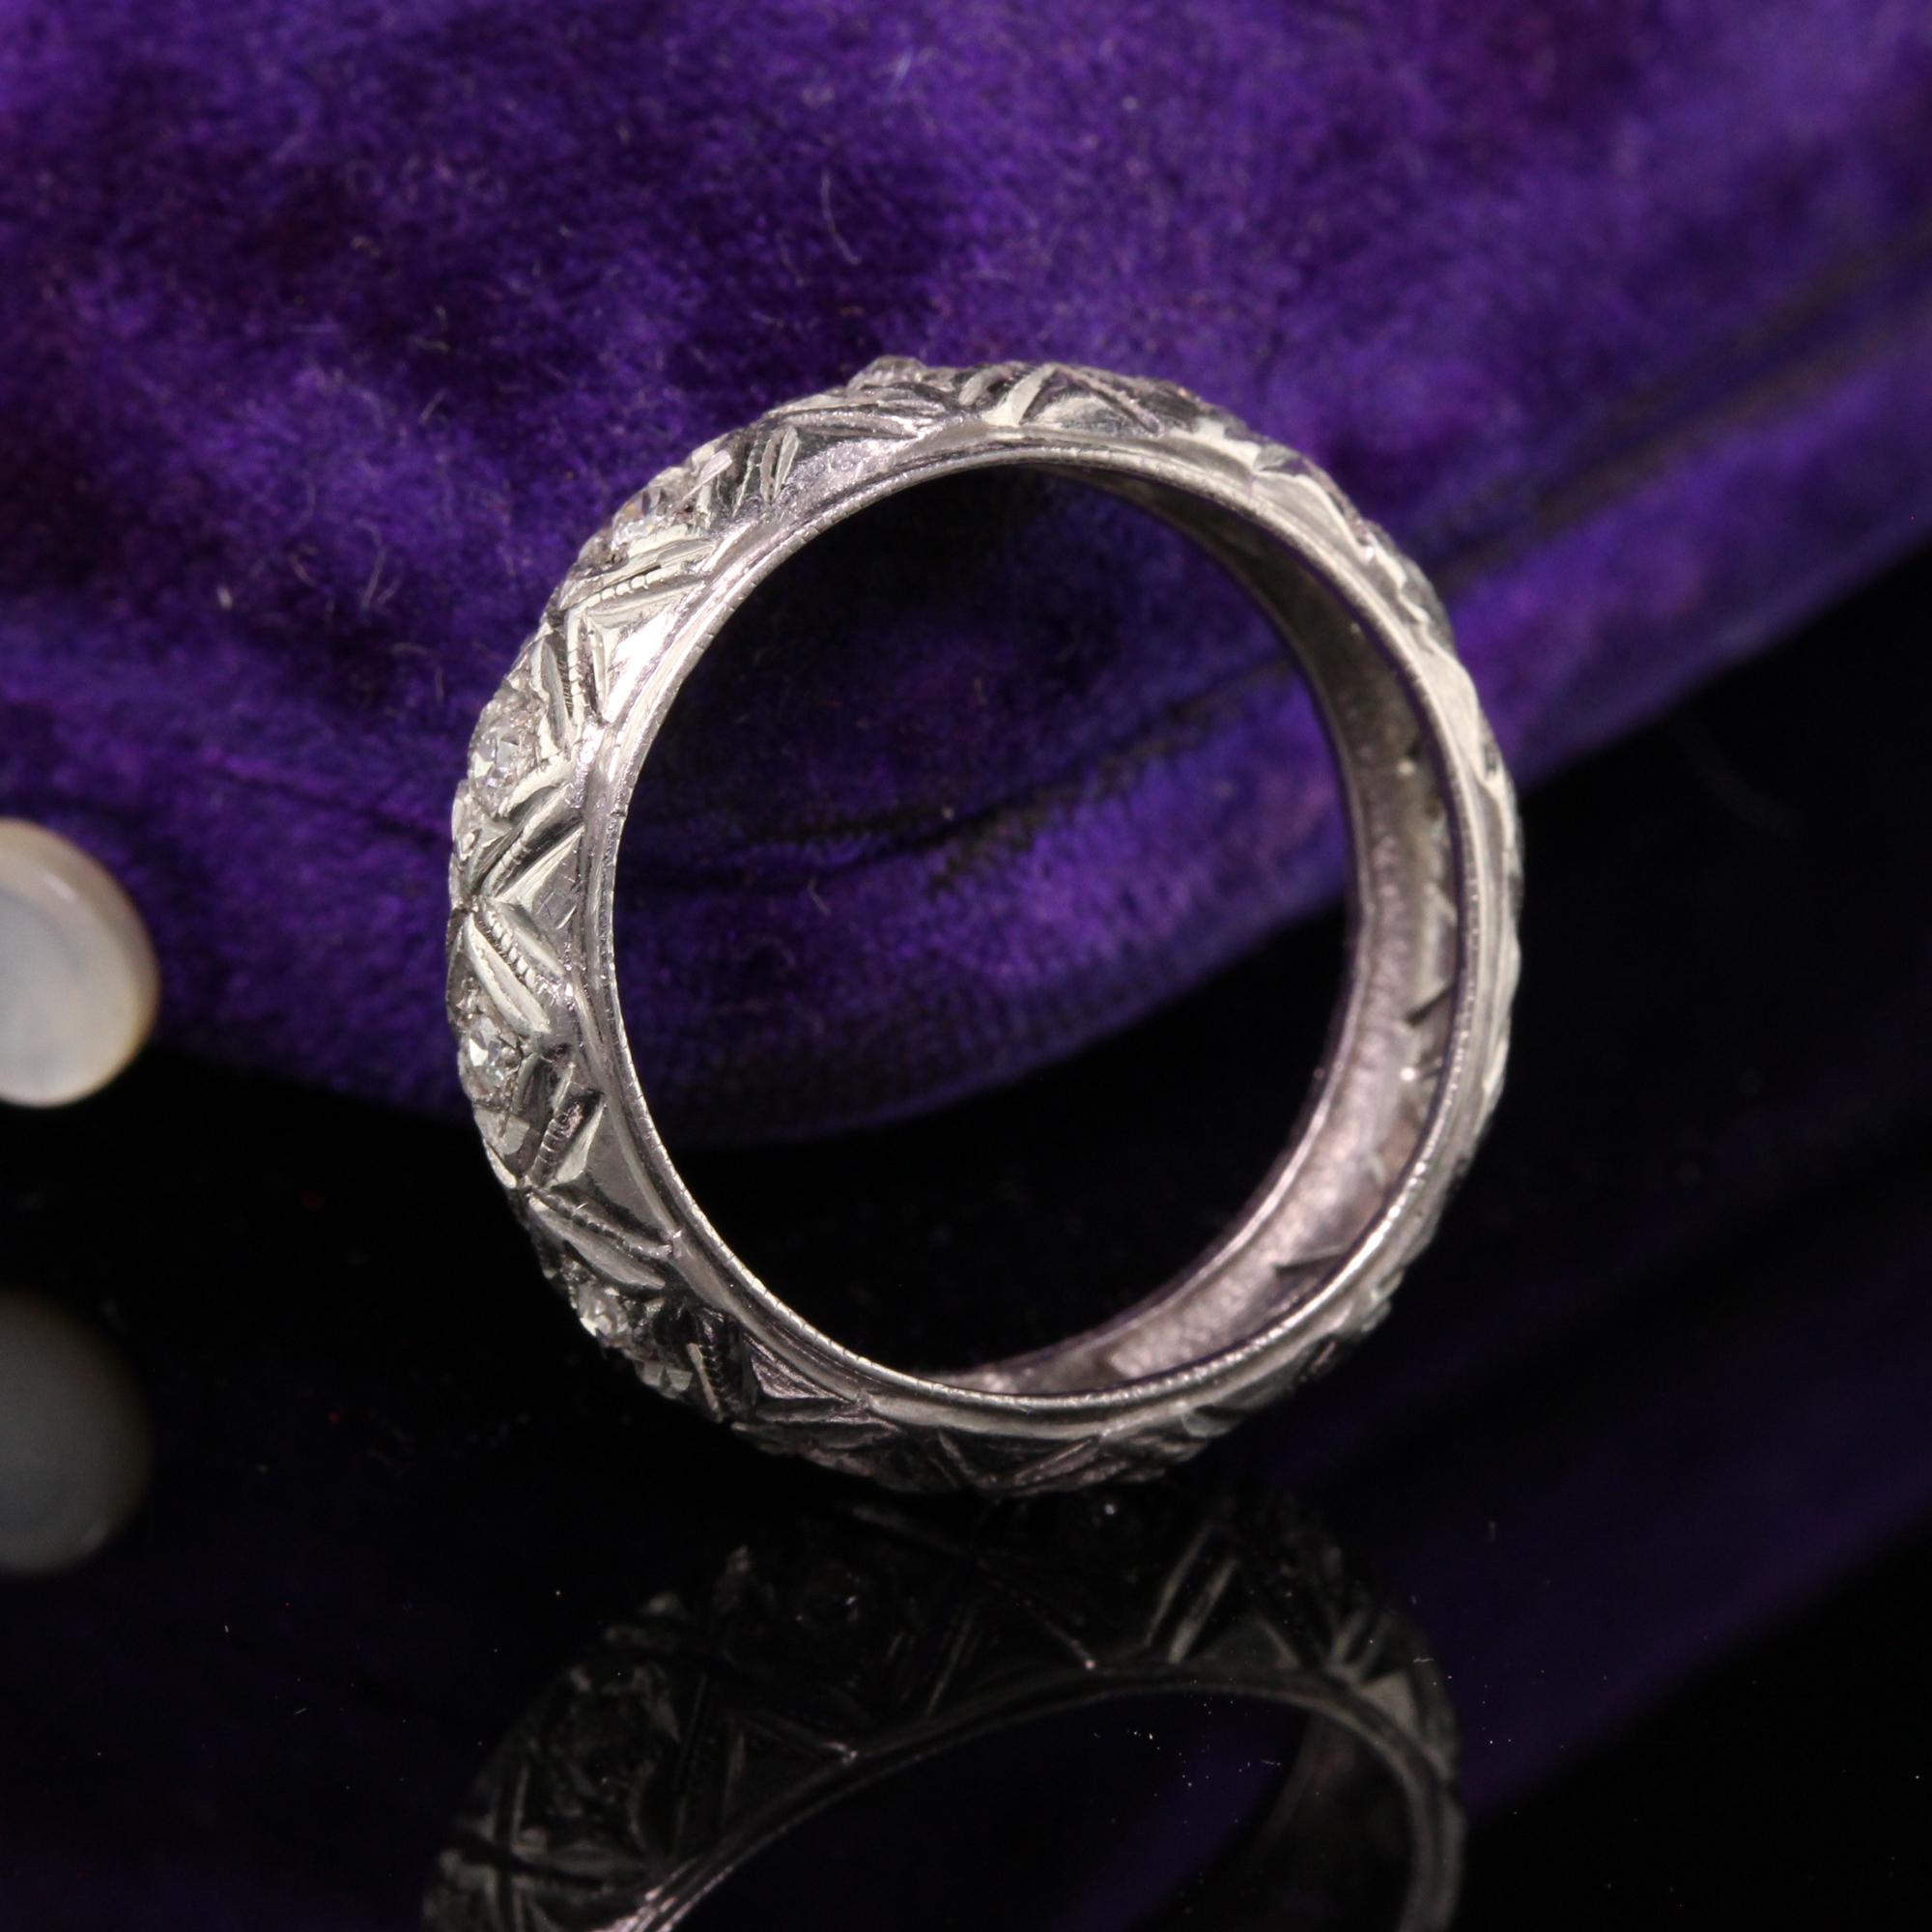 Beautiful Antique Art Deco Platinum Old Mine Diamond Eternity Wedding Band - Size 5 1/2. This classic engraved old mine diamond wedding band is in good condition and has hand engravings all around it.

Item #R0898

Metal: Platinum

Weight: 2.3